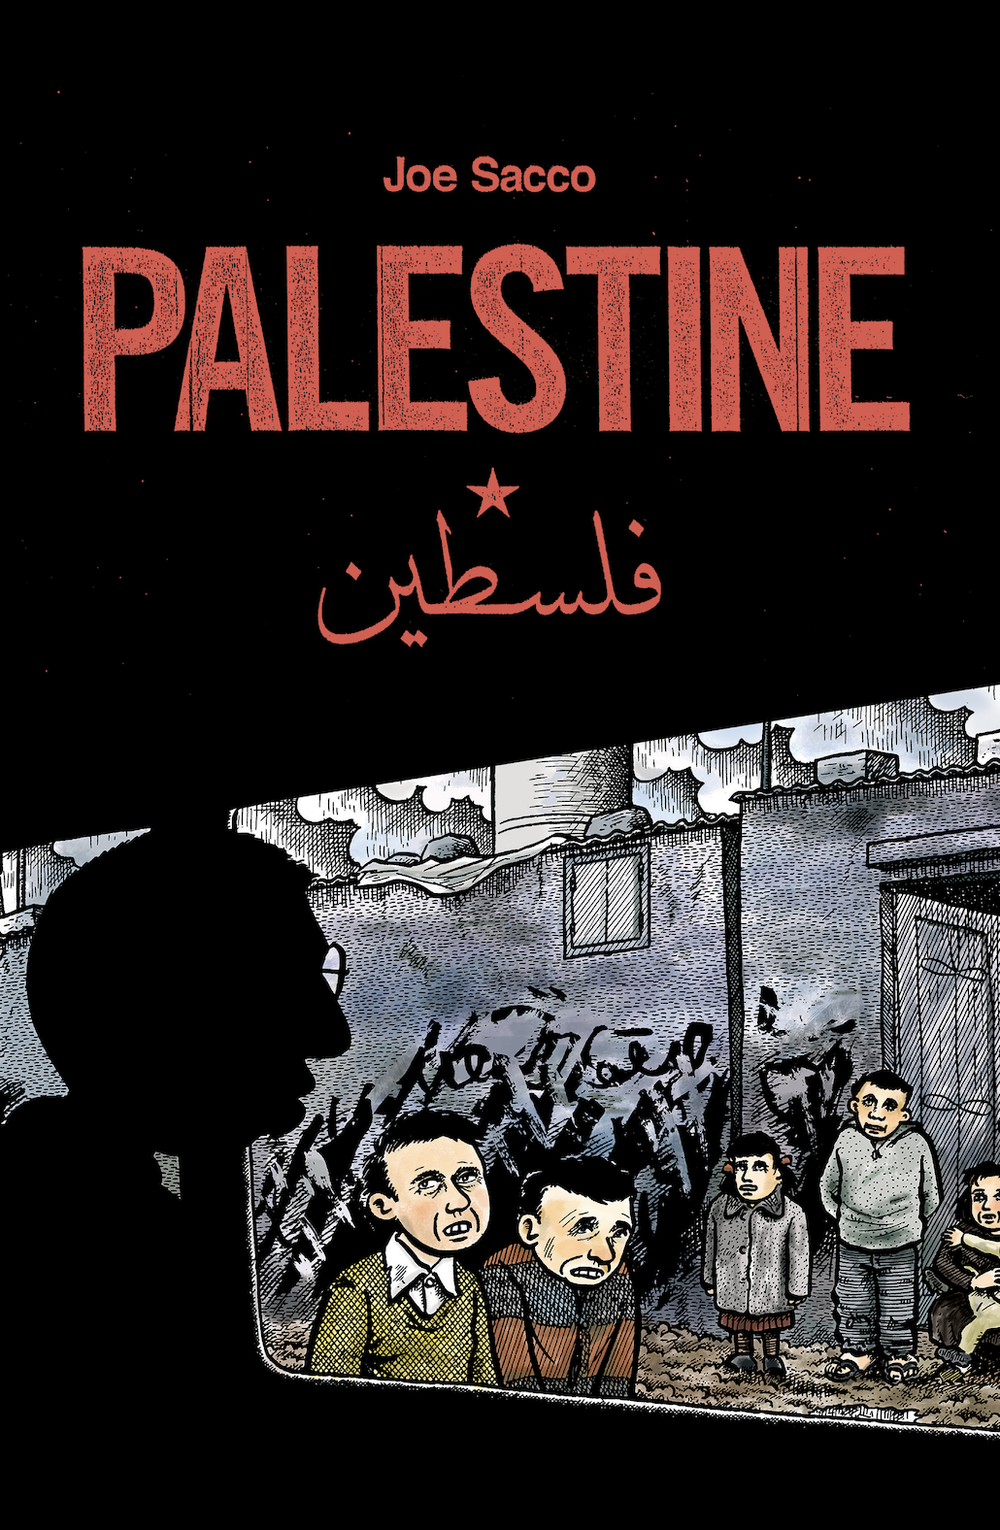 The cover of <em>Palestine</em> by Joe Sacco. He says he is glad his book can help inform readers, but that its resurgence comes tinged with sadness that the topic still has such validity.